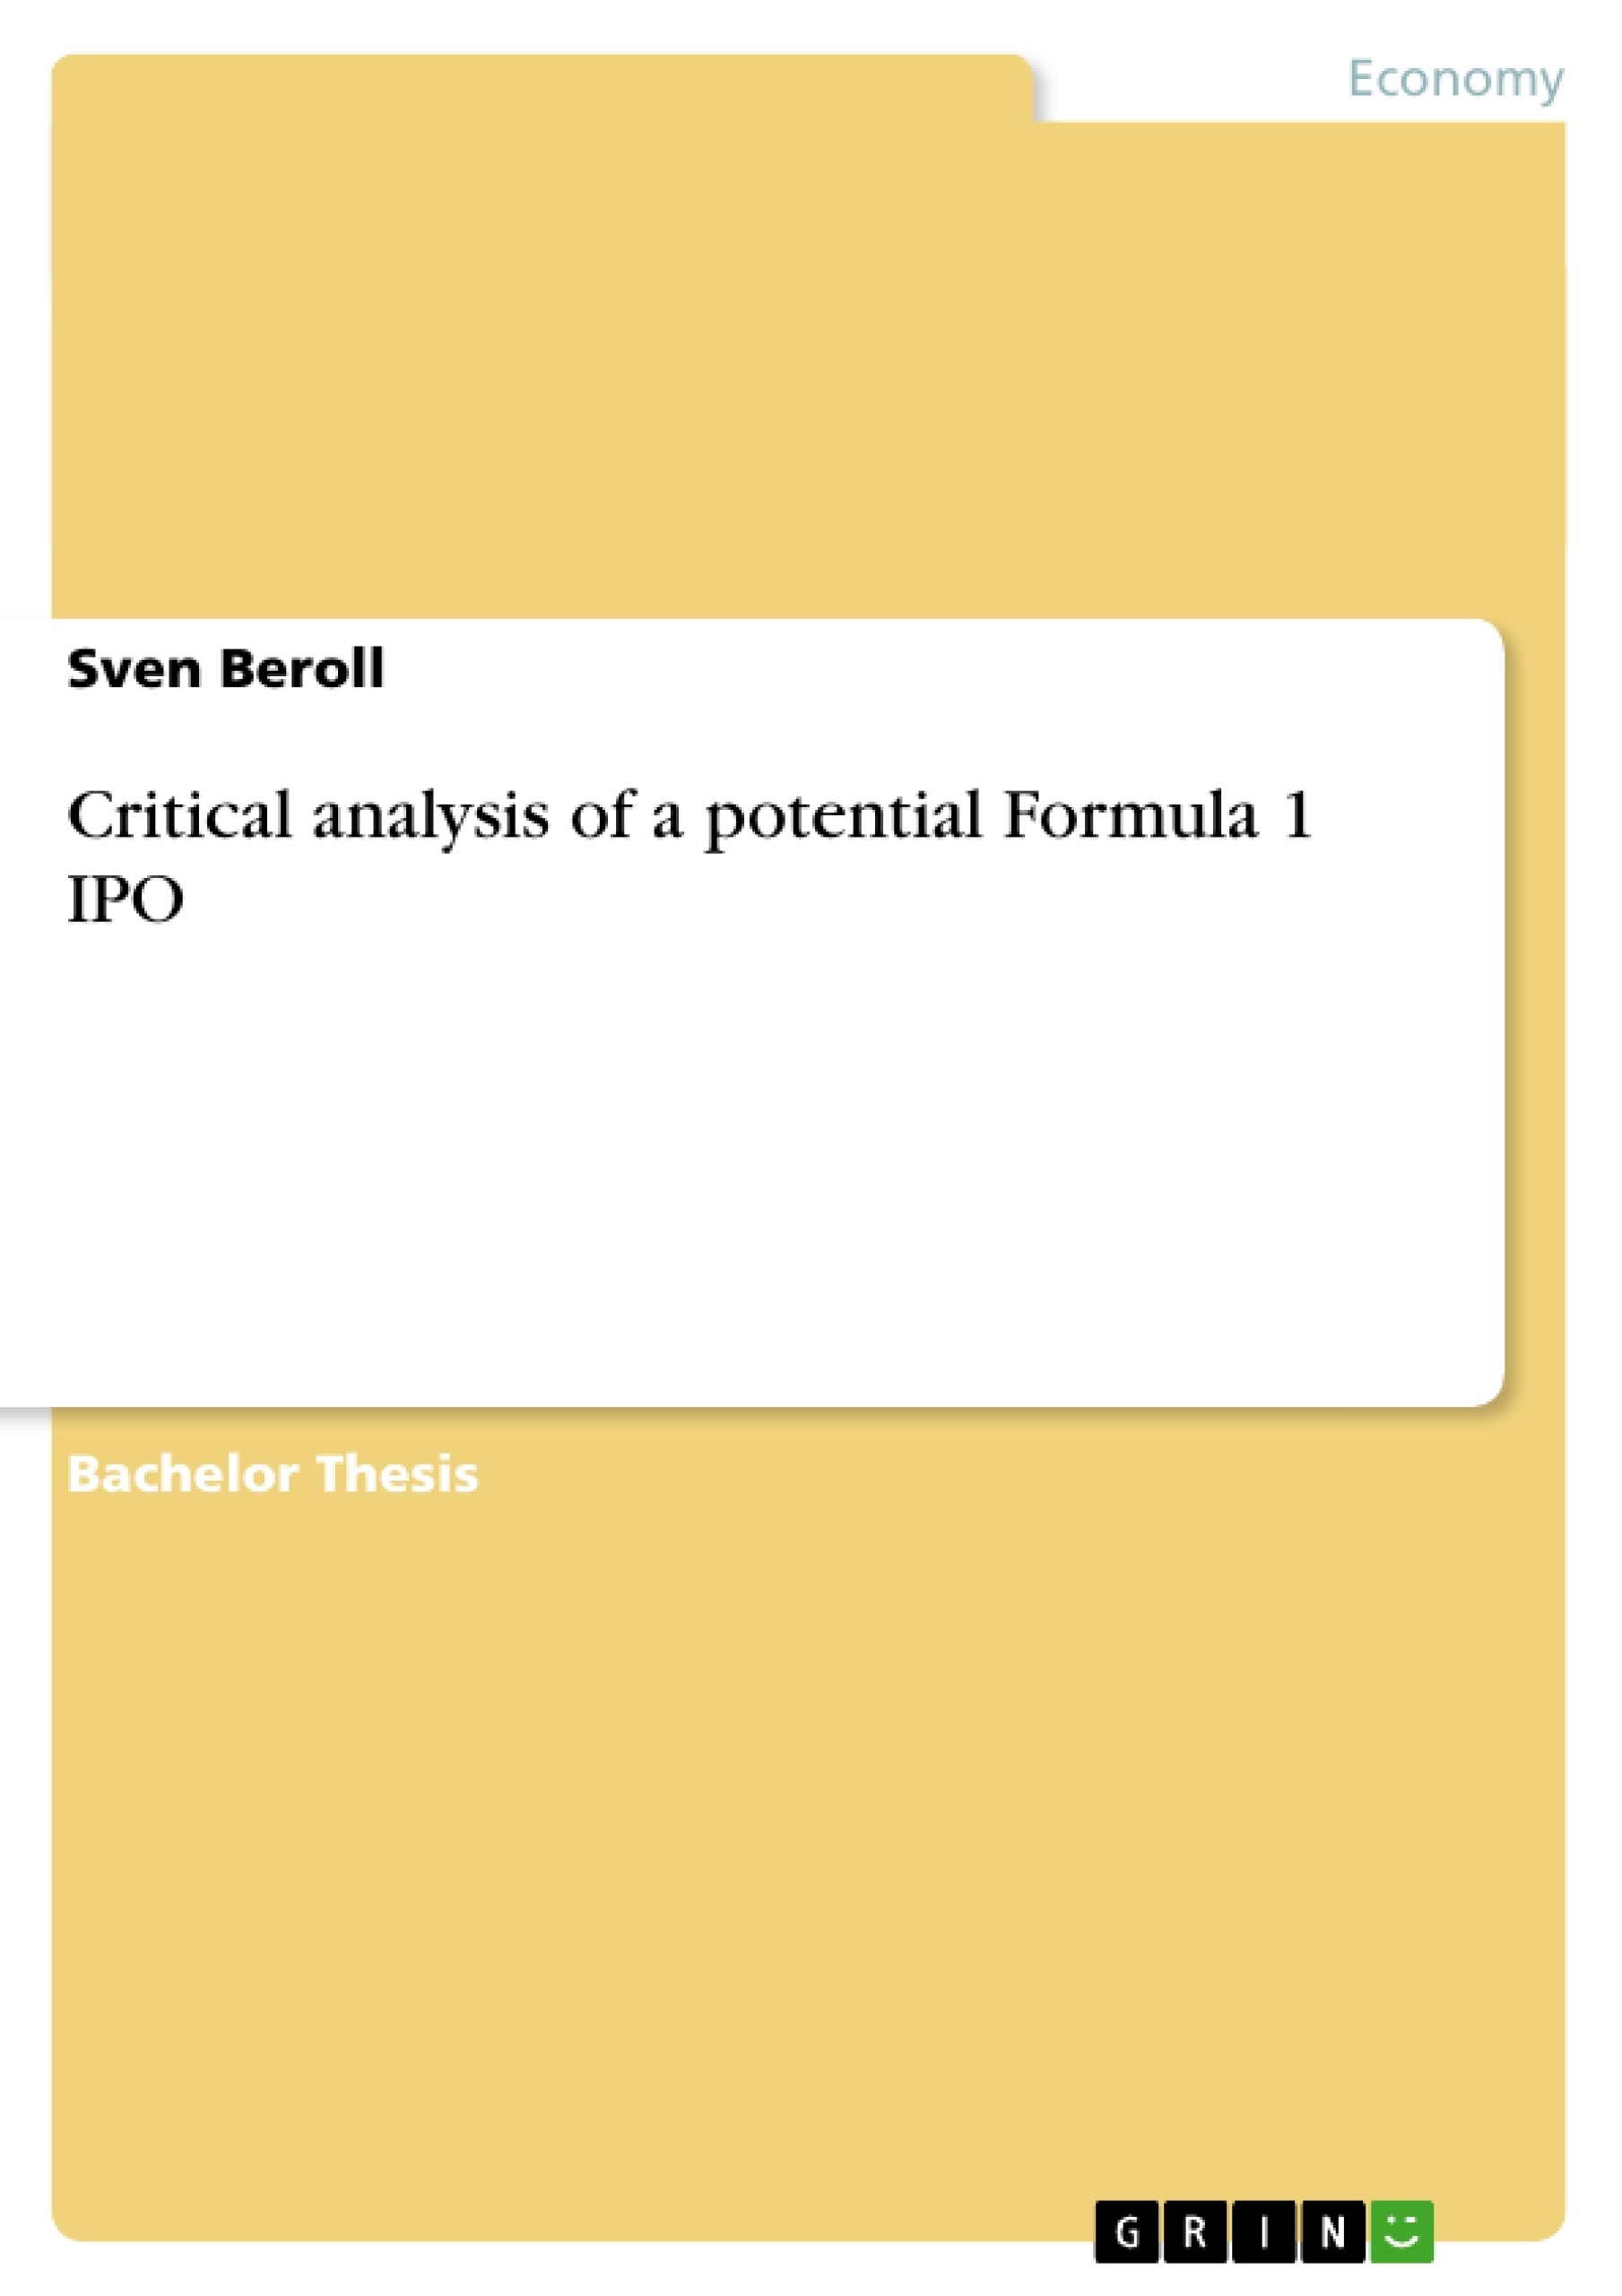 Title: Critical analysis of a potential Formula 1 IPO